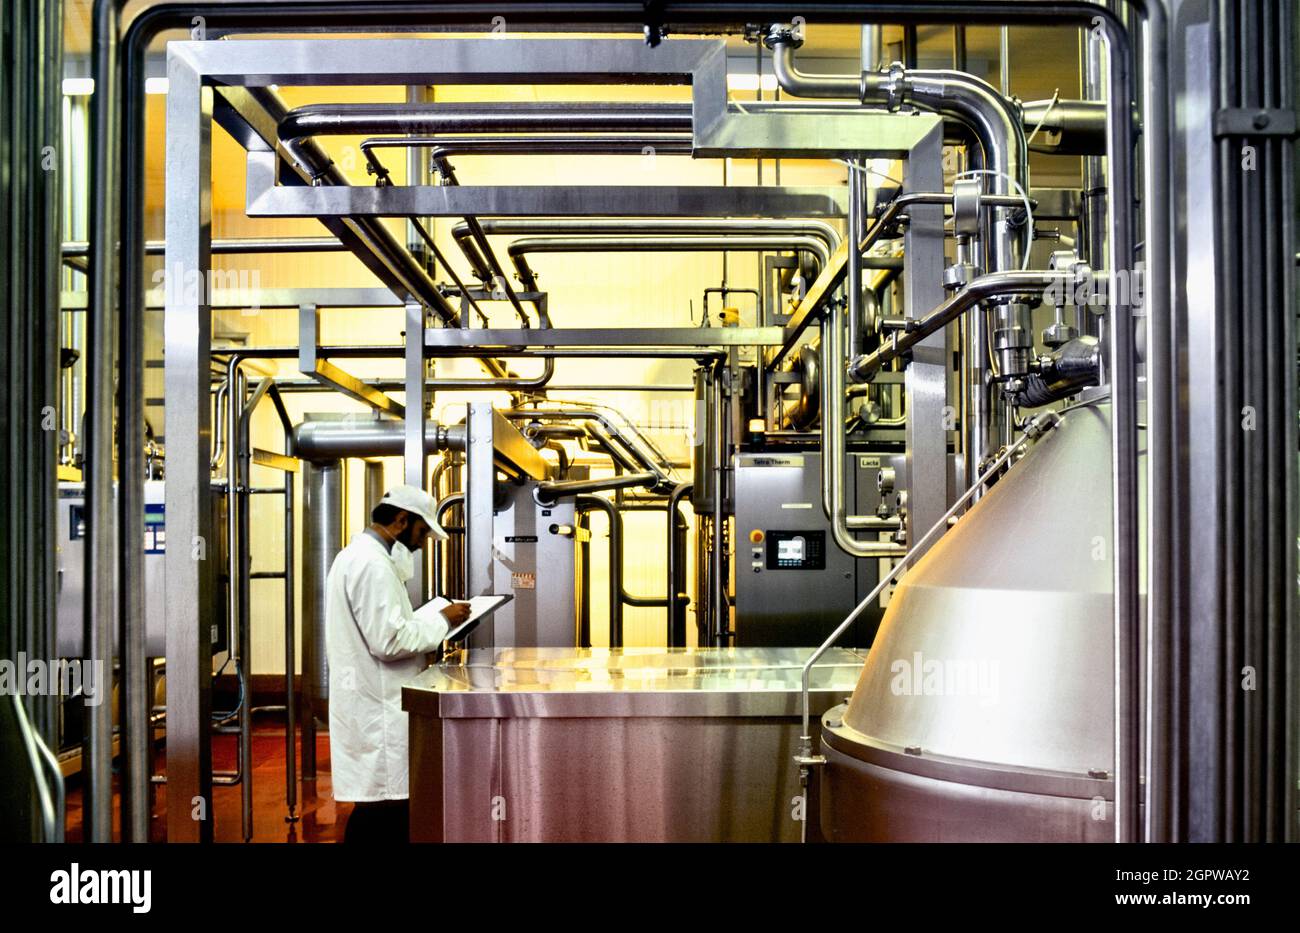 Pasteurisation area of a large milk processing plant Stock Photo